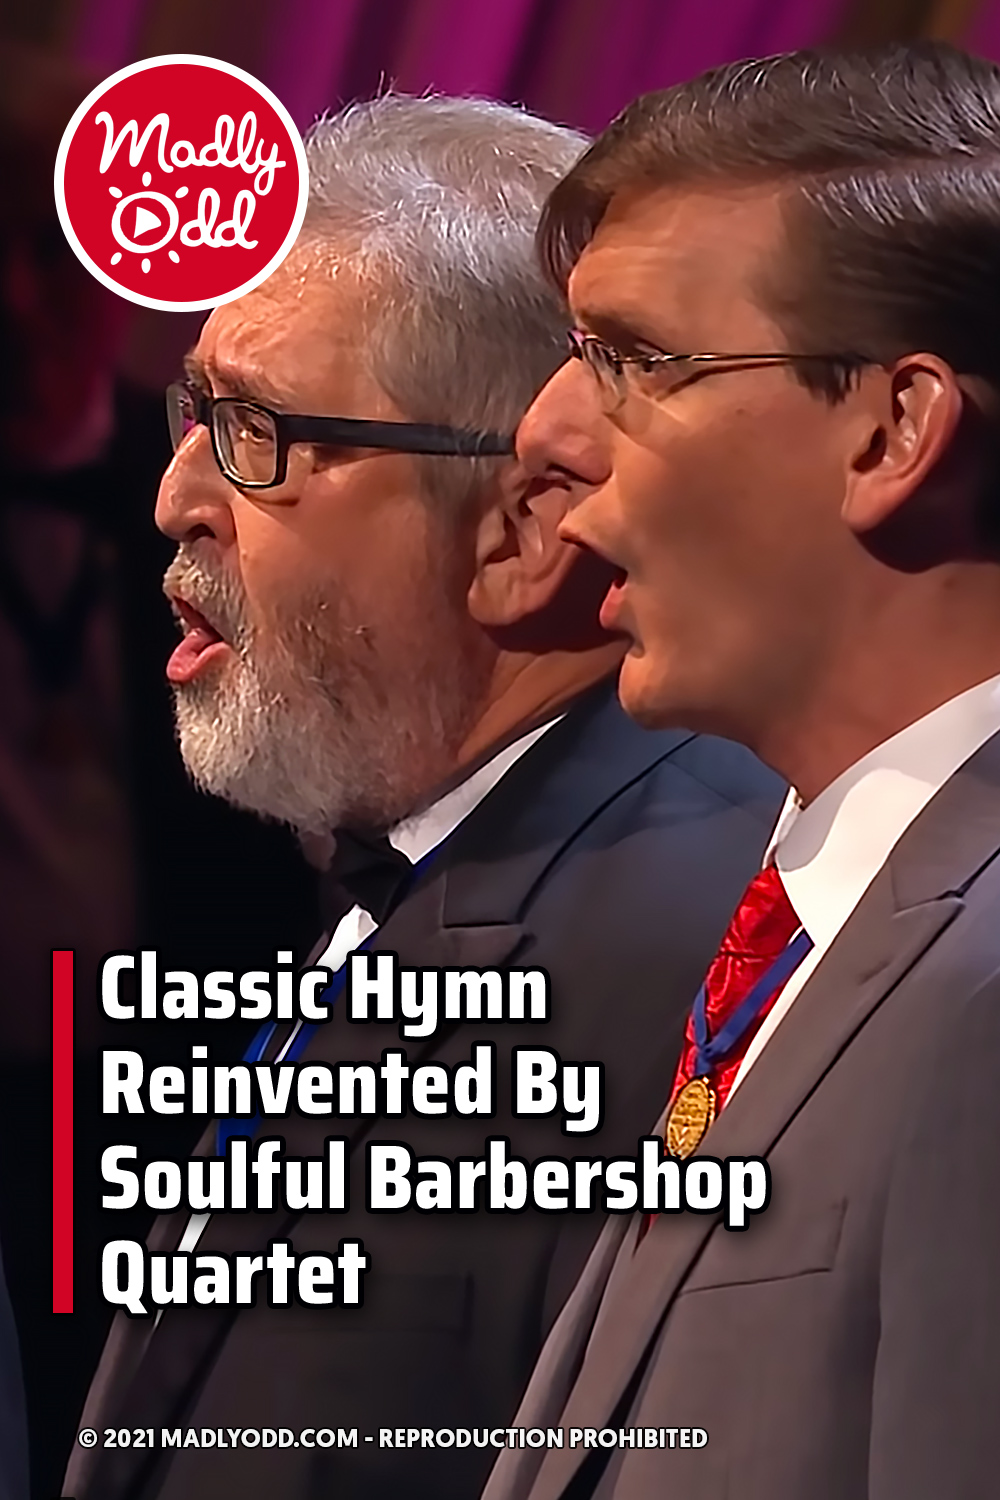 Classic Hymn Reinvented By Soulful Barbershop Quartet